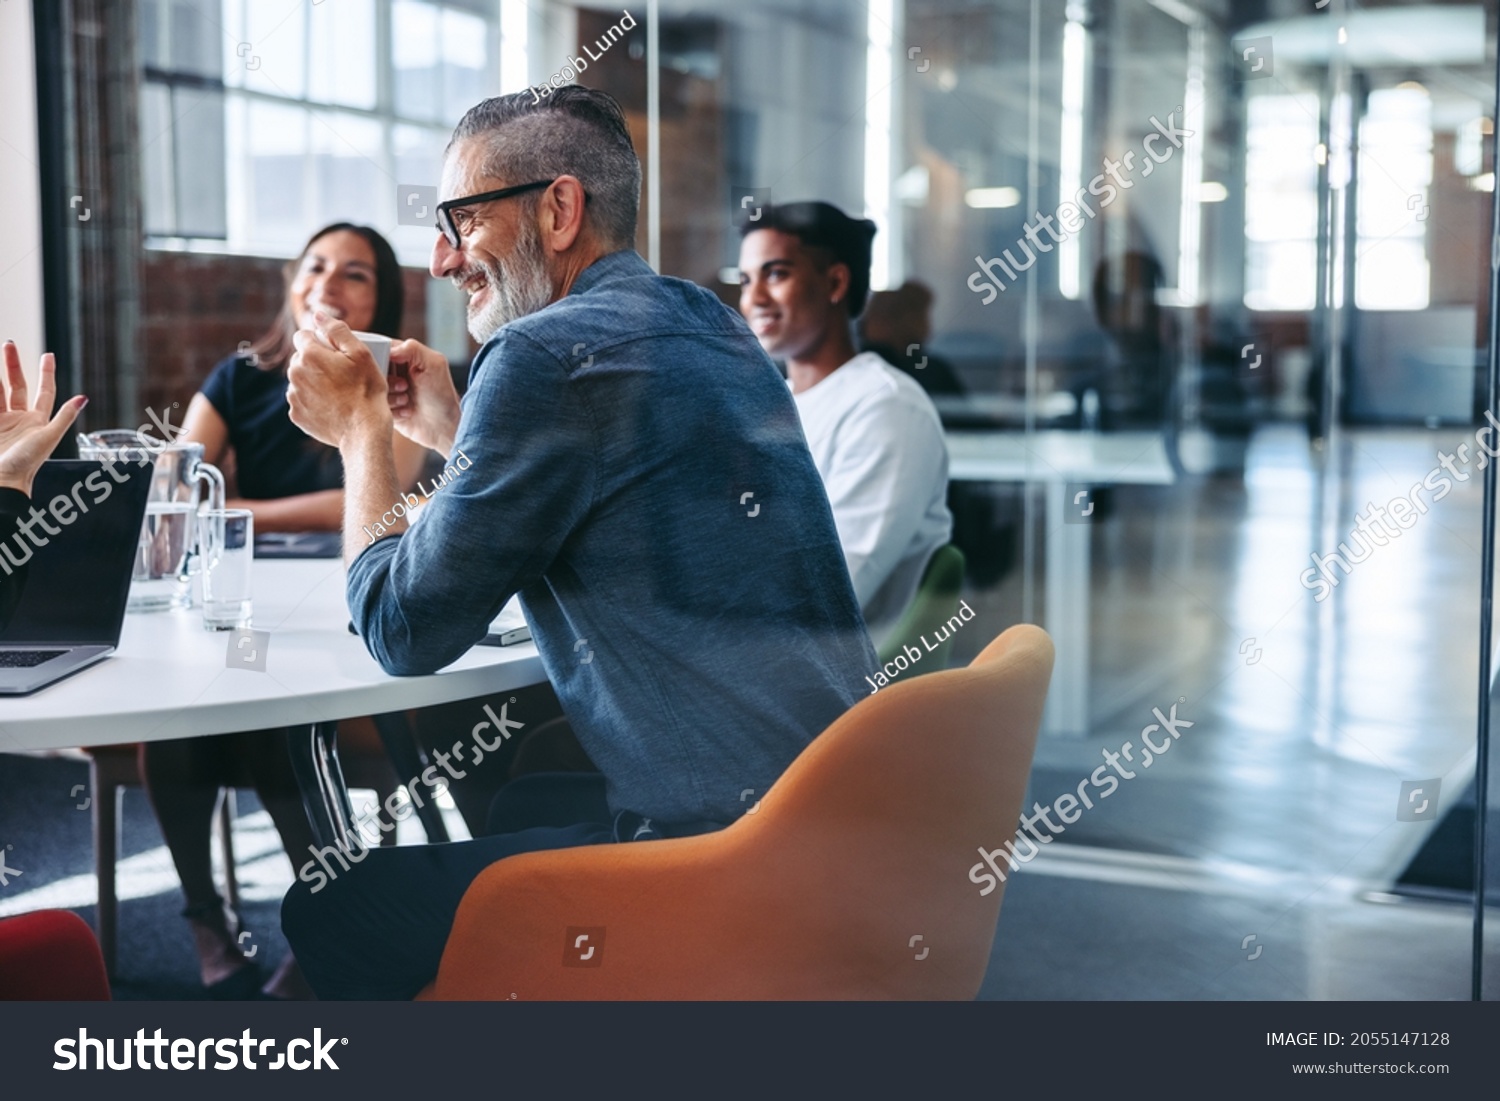 Happy mature businessman attending a meeting with his colleagues in an office. Experienced businessman smiling cheerfully while sitting with his team in meeting room. Businesspeople working together #2055147128